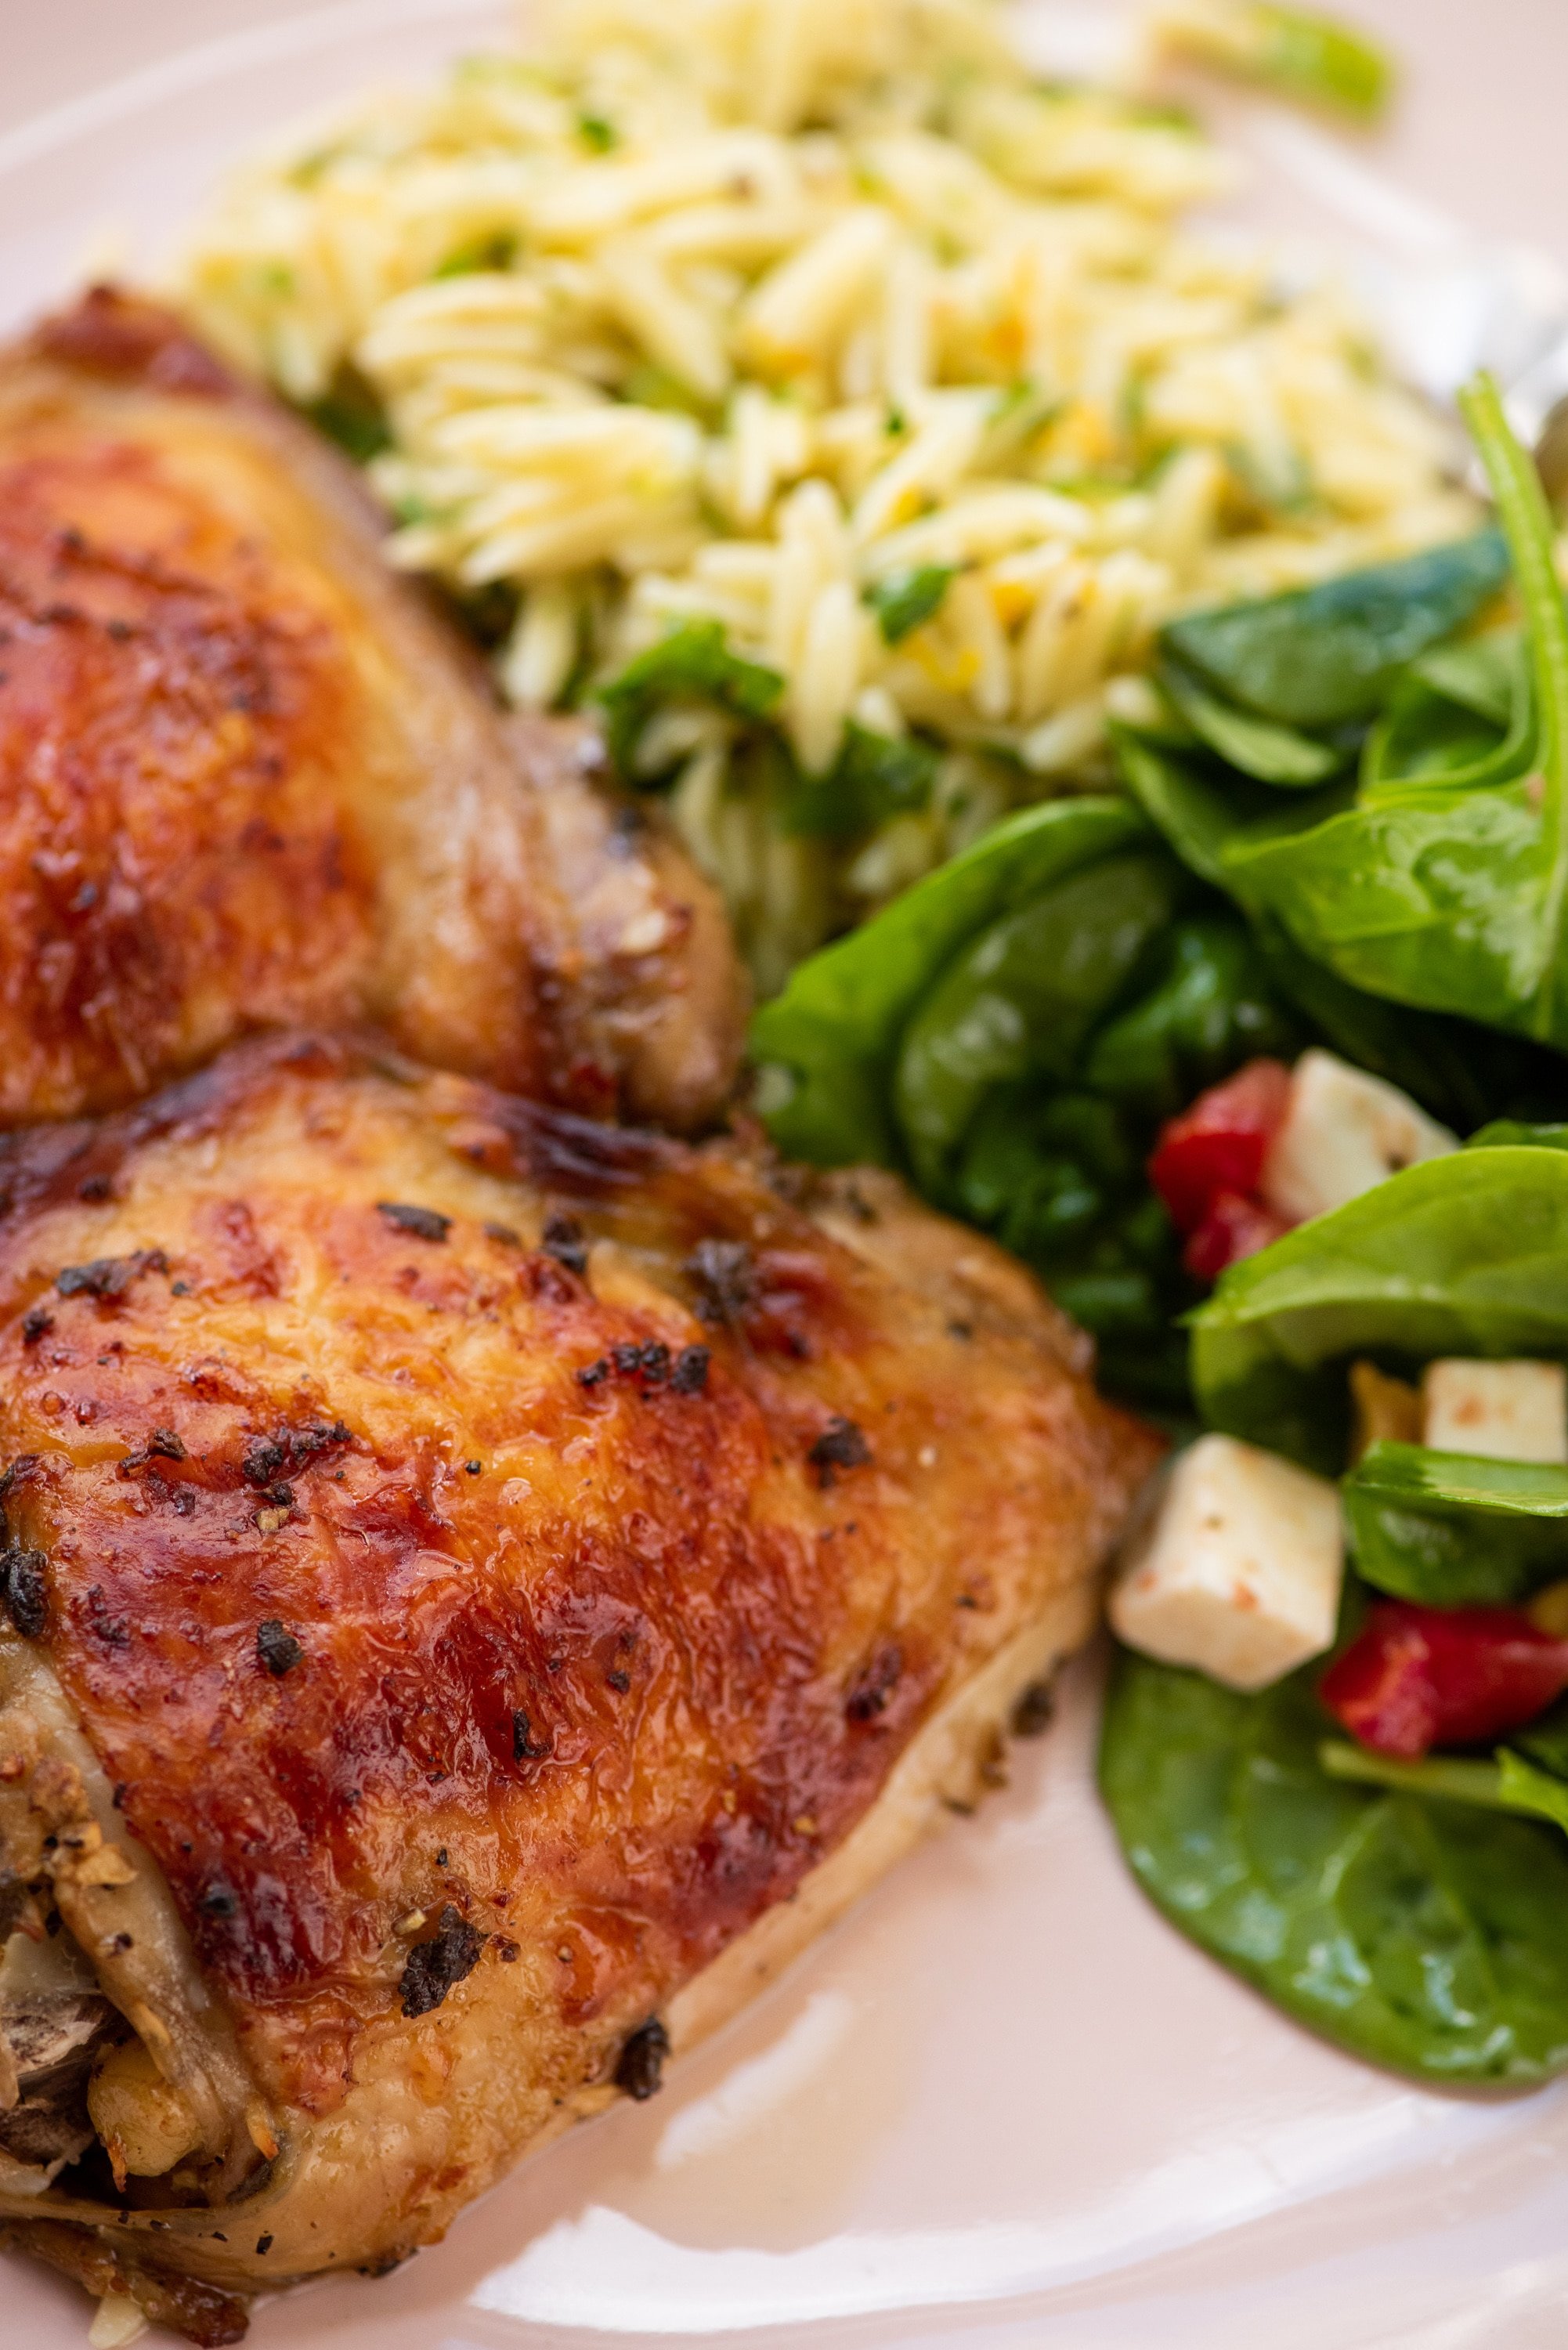 Roasted chicken thighs on a plate with salad.